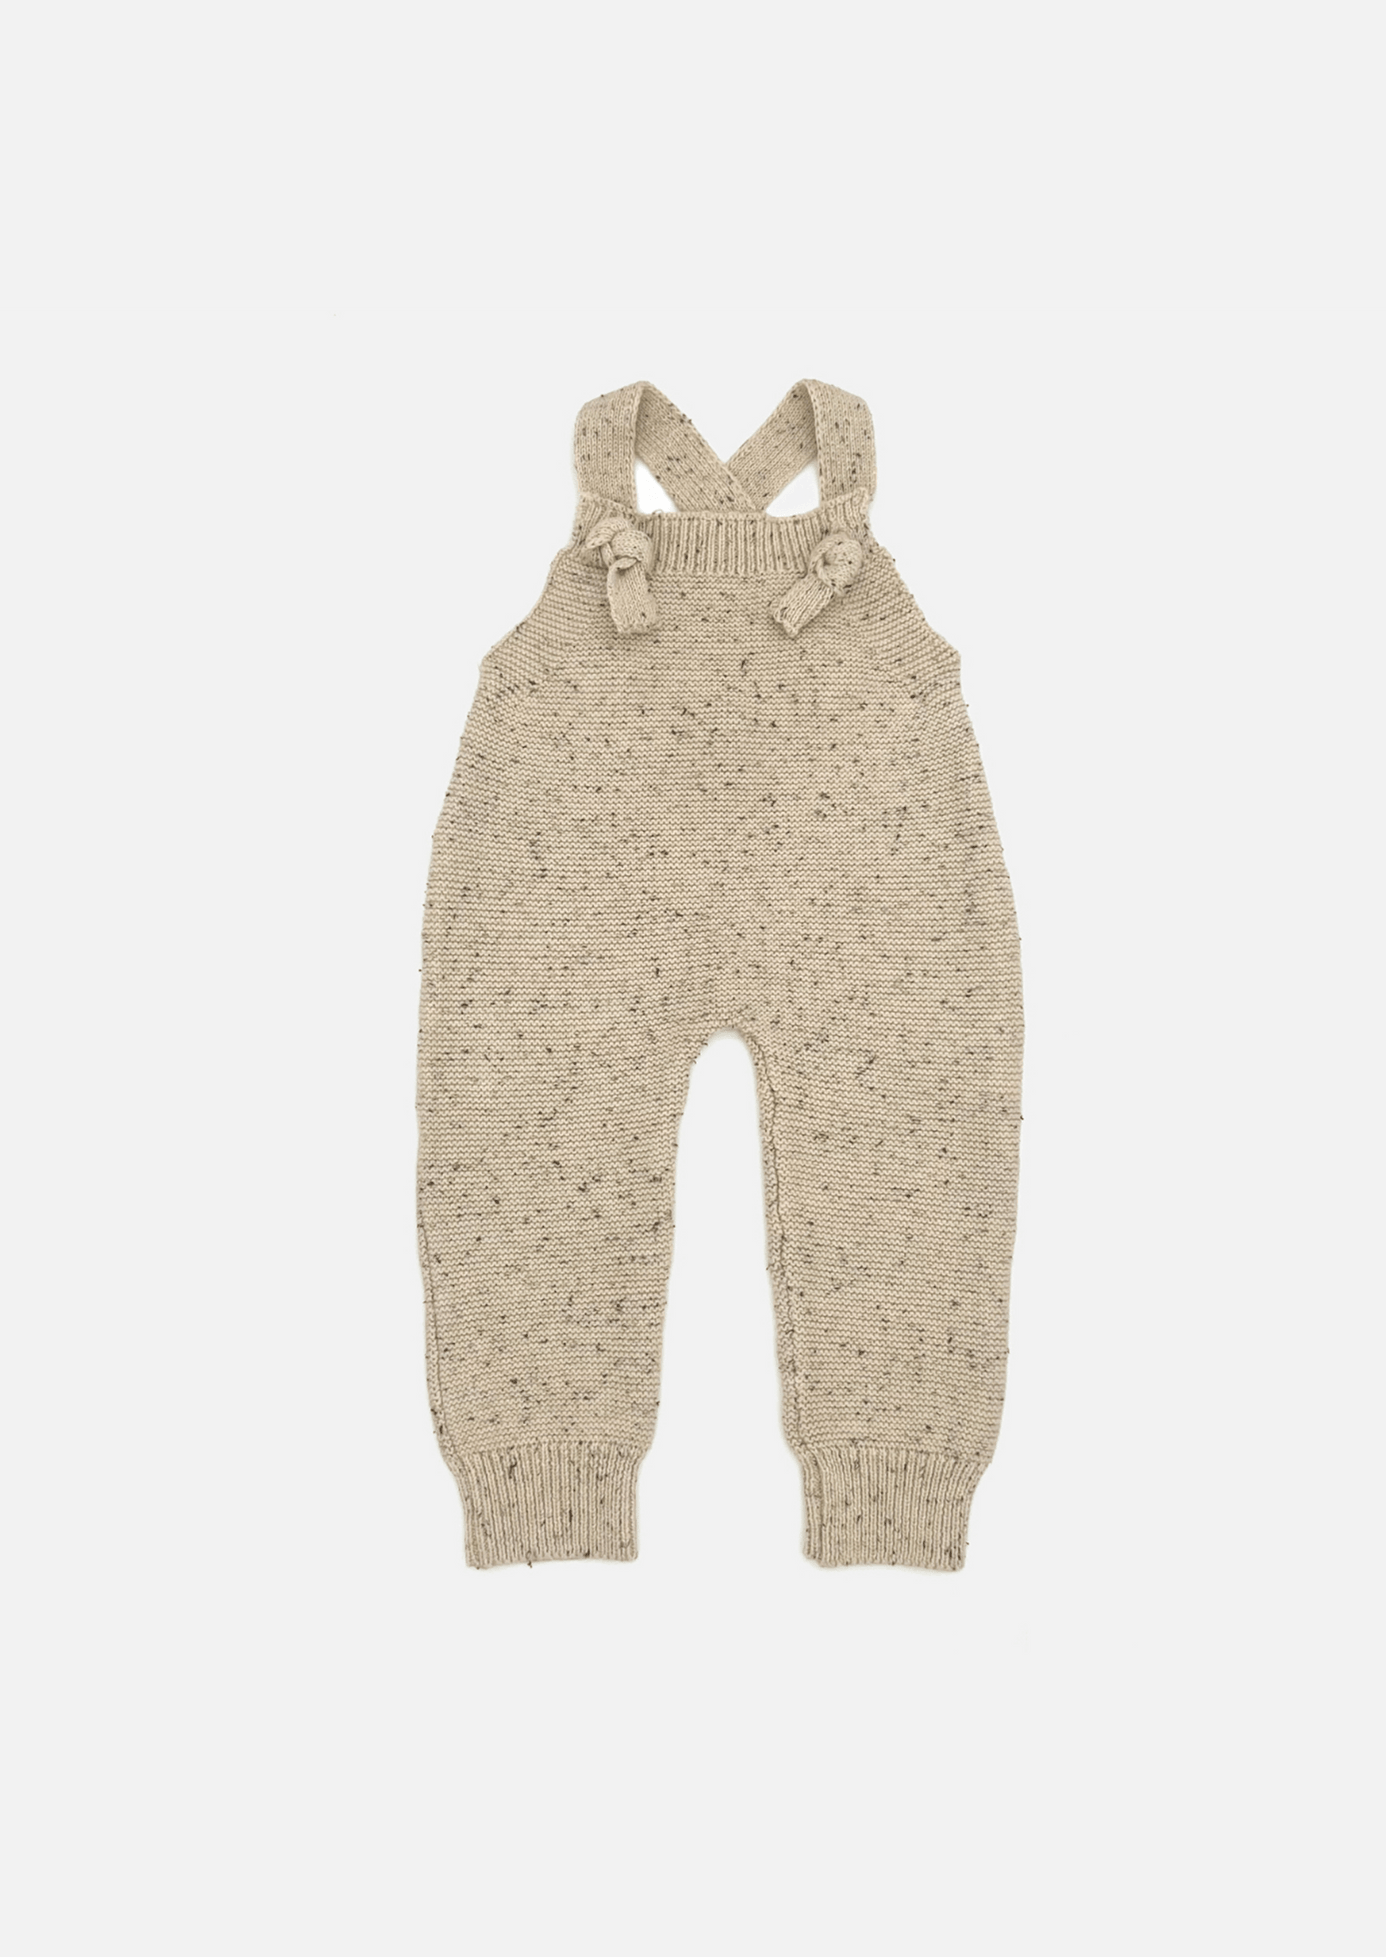 Baby Purl Knit Overalls in Honey Sprinkles - Baby Purl Knit Overalls in Honey Sprinkles - undefined - Salt and Honey